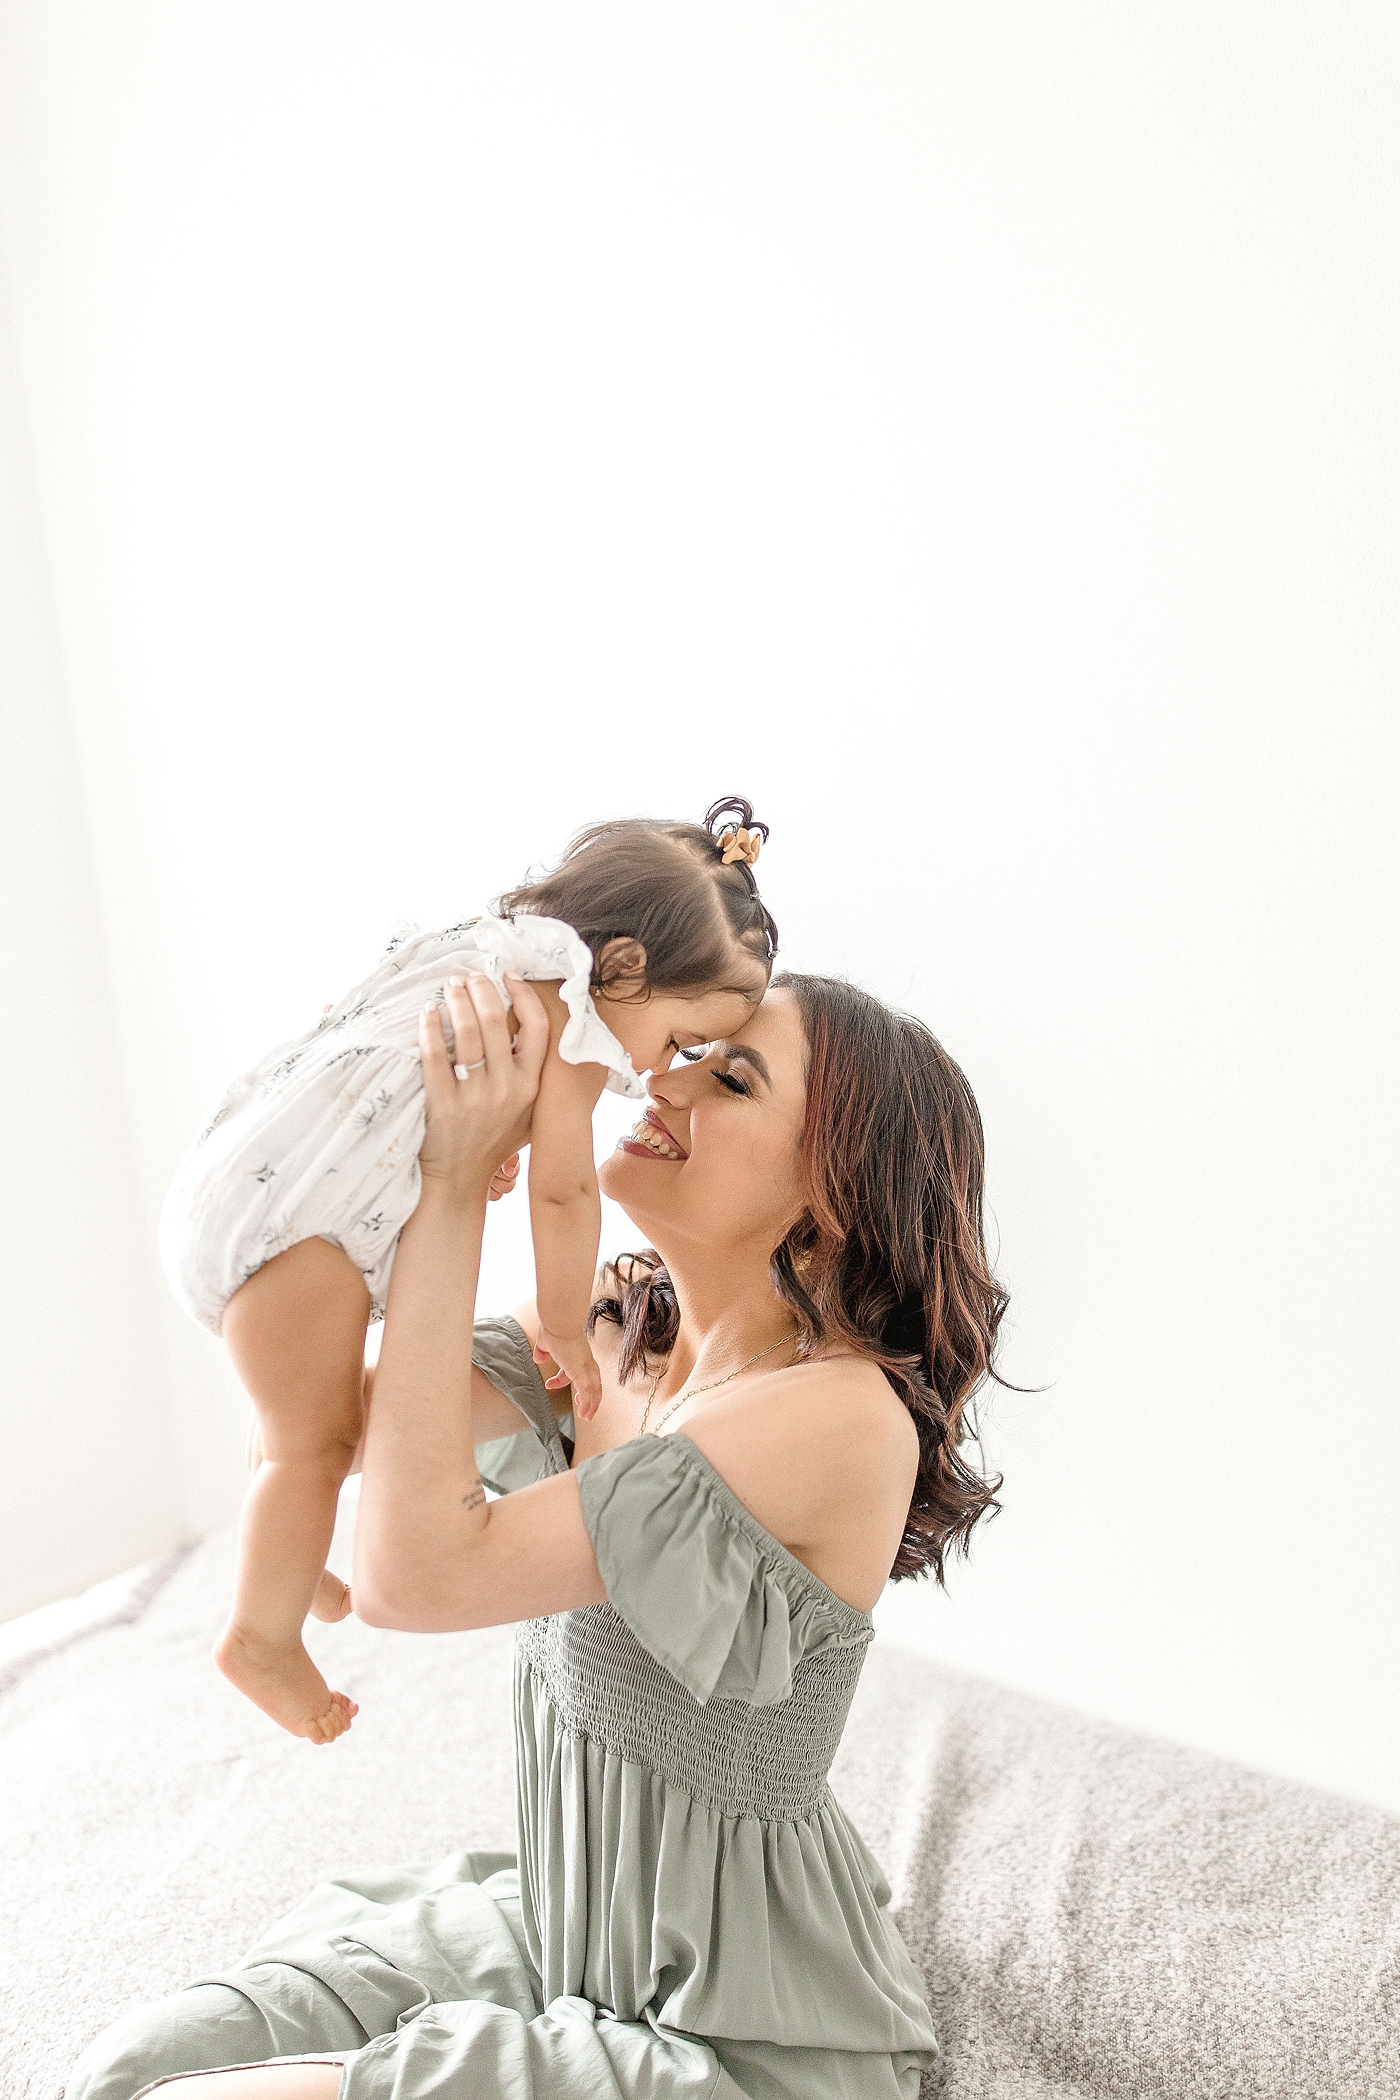 Mom holds up baby girl in the air and nuzzles her nose during baby photography miami session. Photo by Ivanna Vidal Photography.